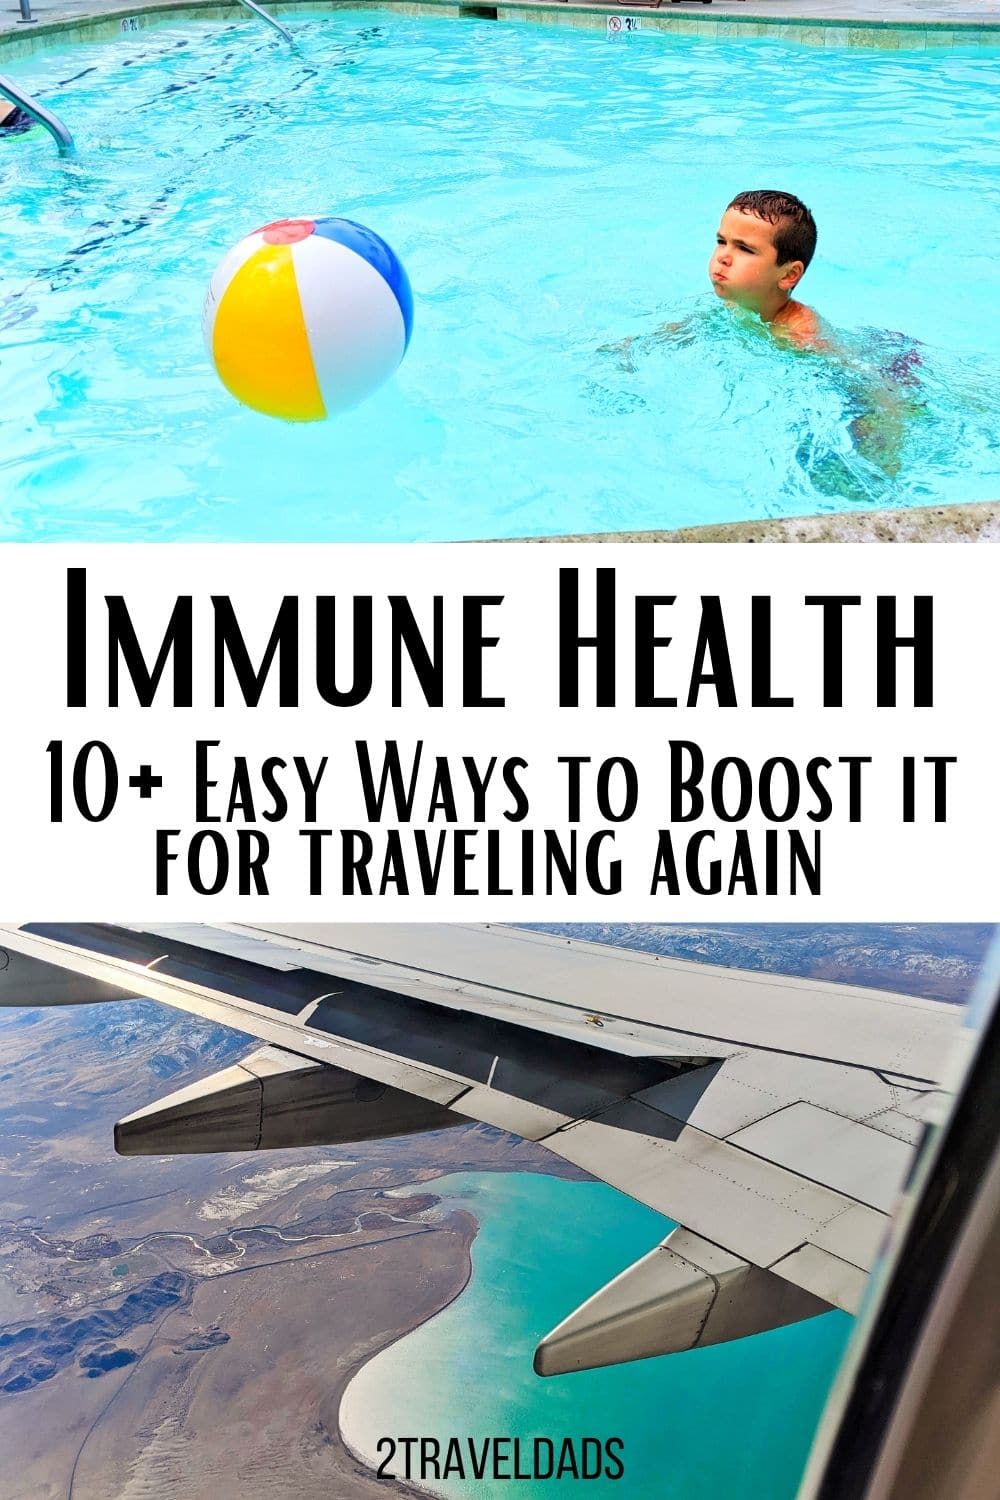 There are many ways to boost immune support to stay healthy, both while traveling and at home. 10+ easy ways to support your immune system, from vitamins to home remedies and natural health options. From both our own daily lives to what health care professionals recommend we talk about the many ways to boost and support our bodies' immunity. During a time when public health is a major concern, what can you do to make sure you and your family are taking care of each other for the future?